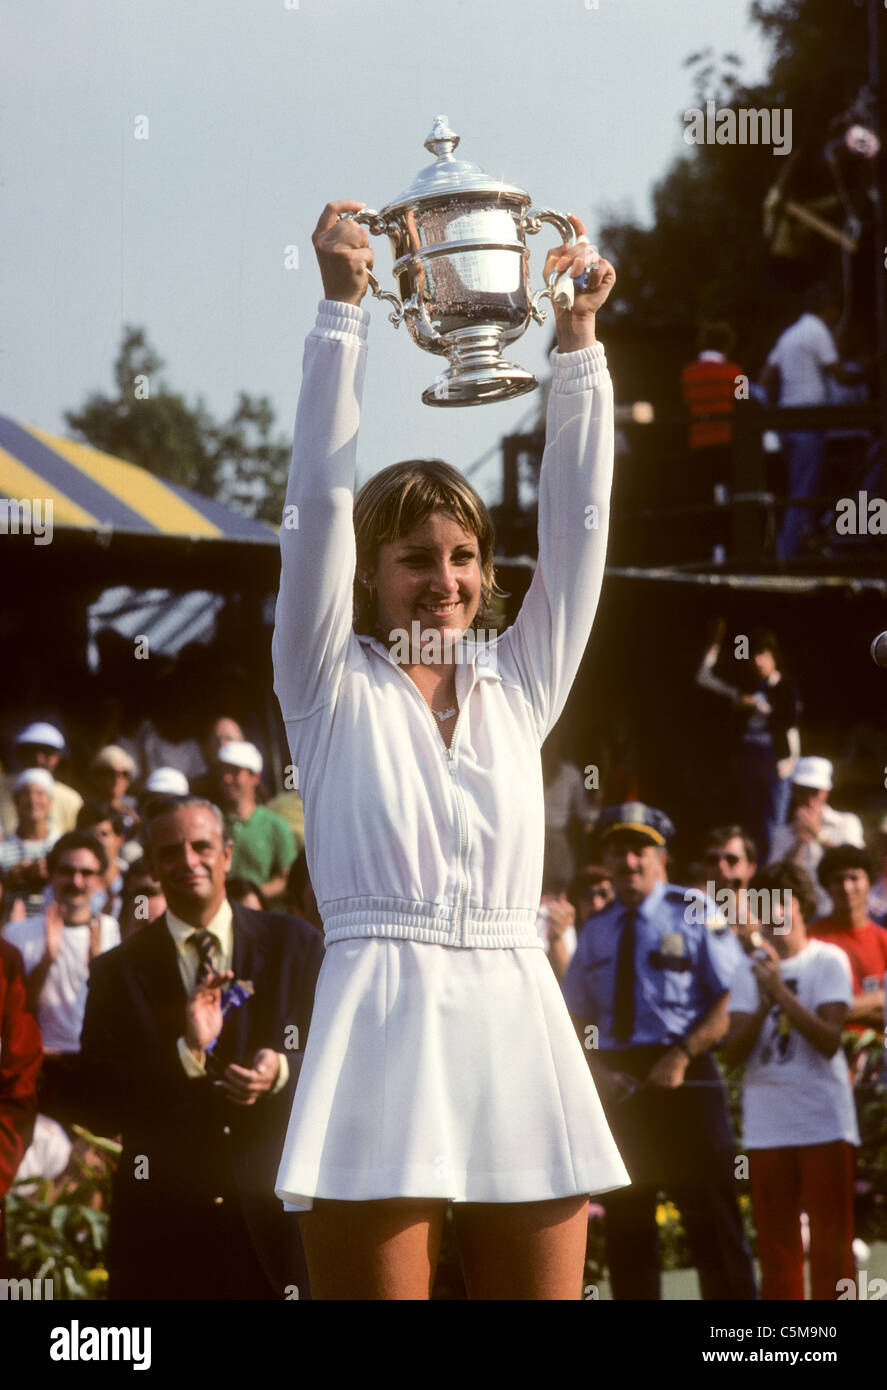 Chris Evert (USA) holding her winner's trophy at the 1977 US Open Tennis Championships Stock Photo